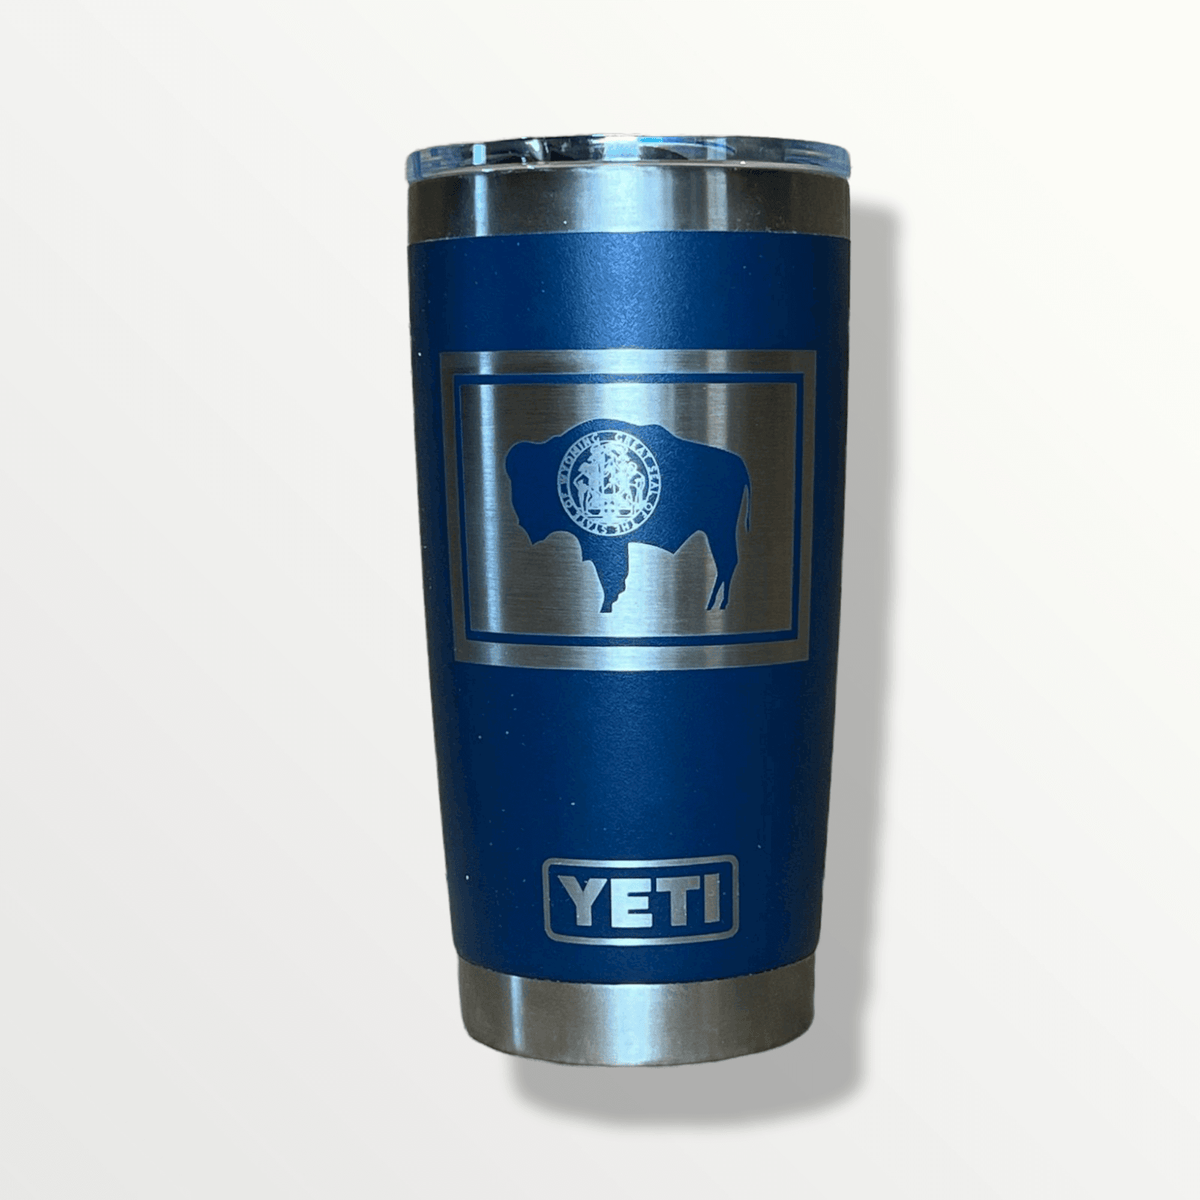 https://cdn.shopify.com/s/files/1/0606/5497/7184/products/whiskey_mountain_woodworks_wyoming_state_yeti_navy1_1200x.png?v=1655844383